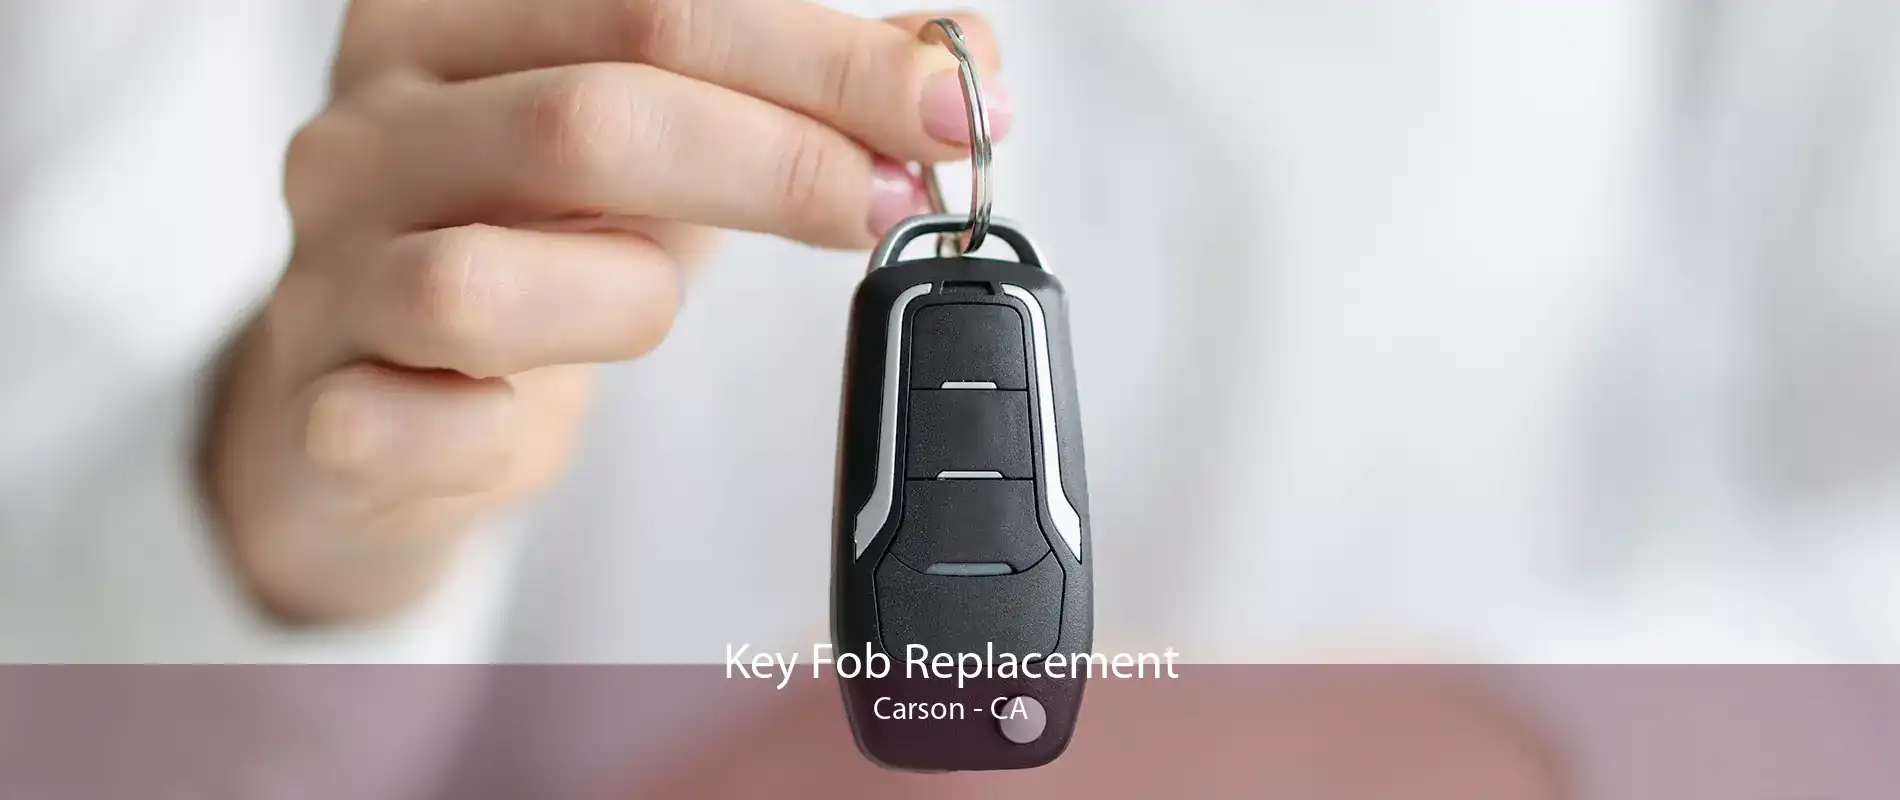 Key Fob Replacement Carson - CA